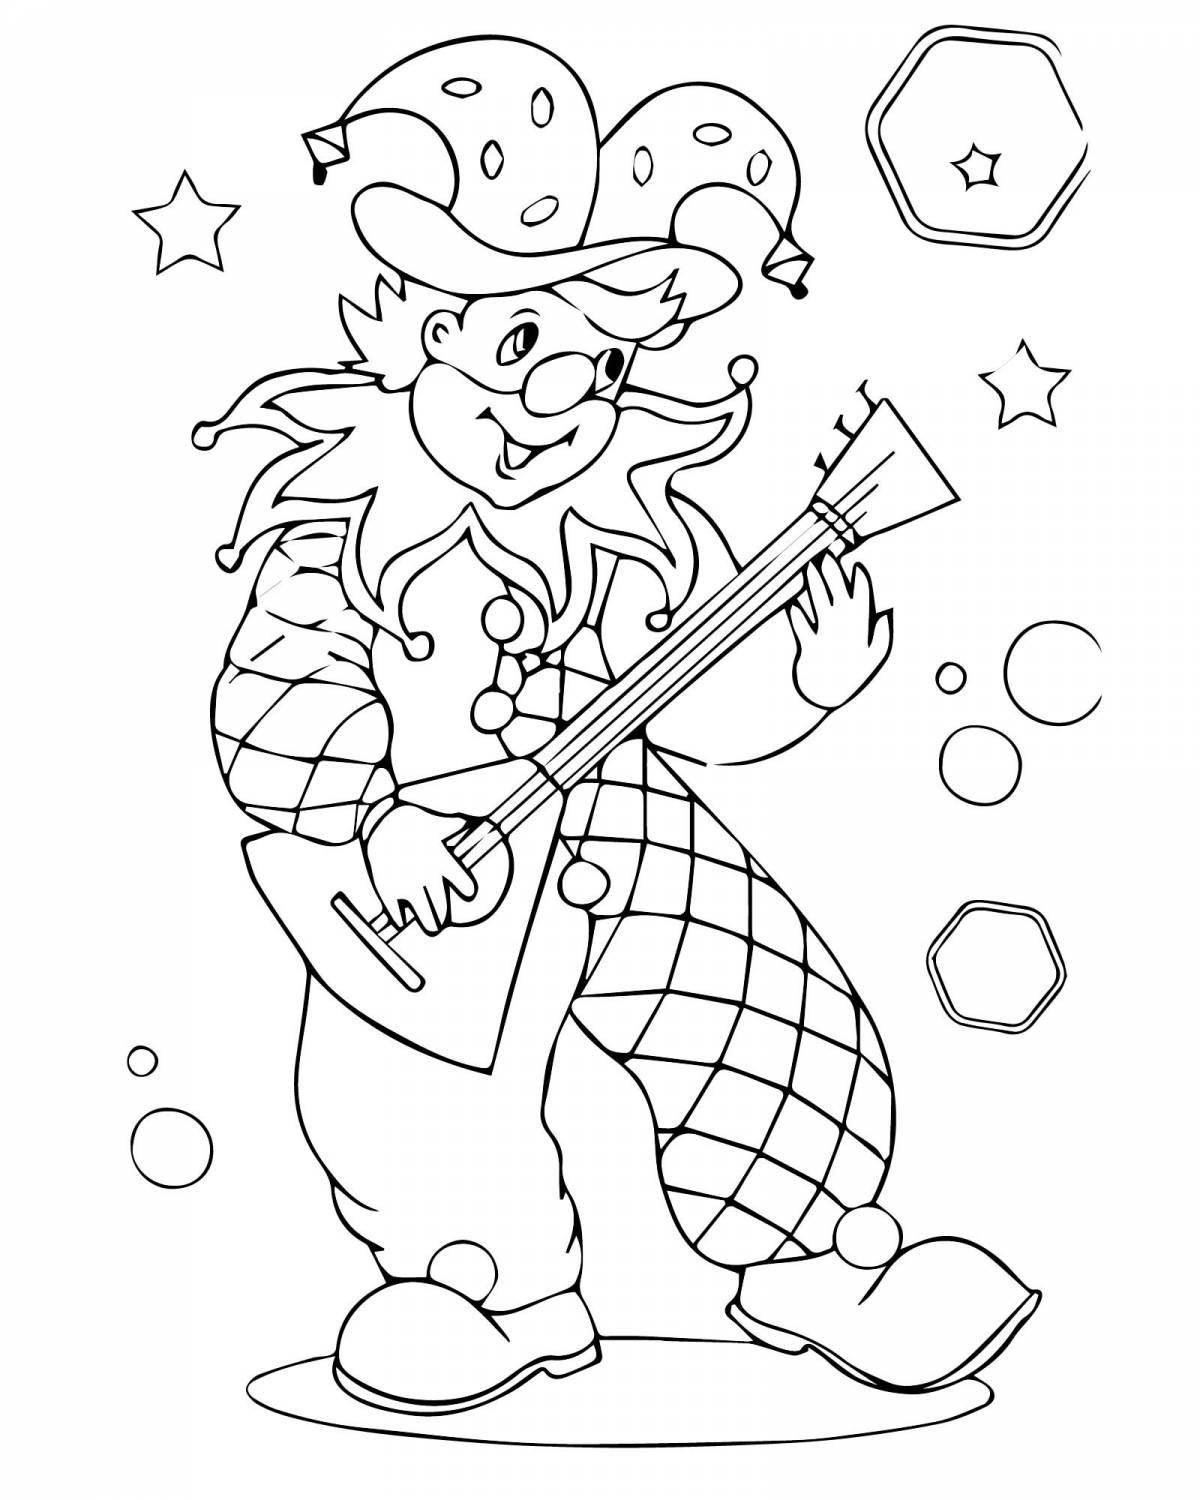 Fancy jester coloring pages for kids